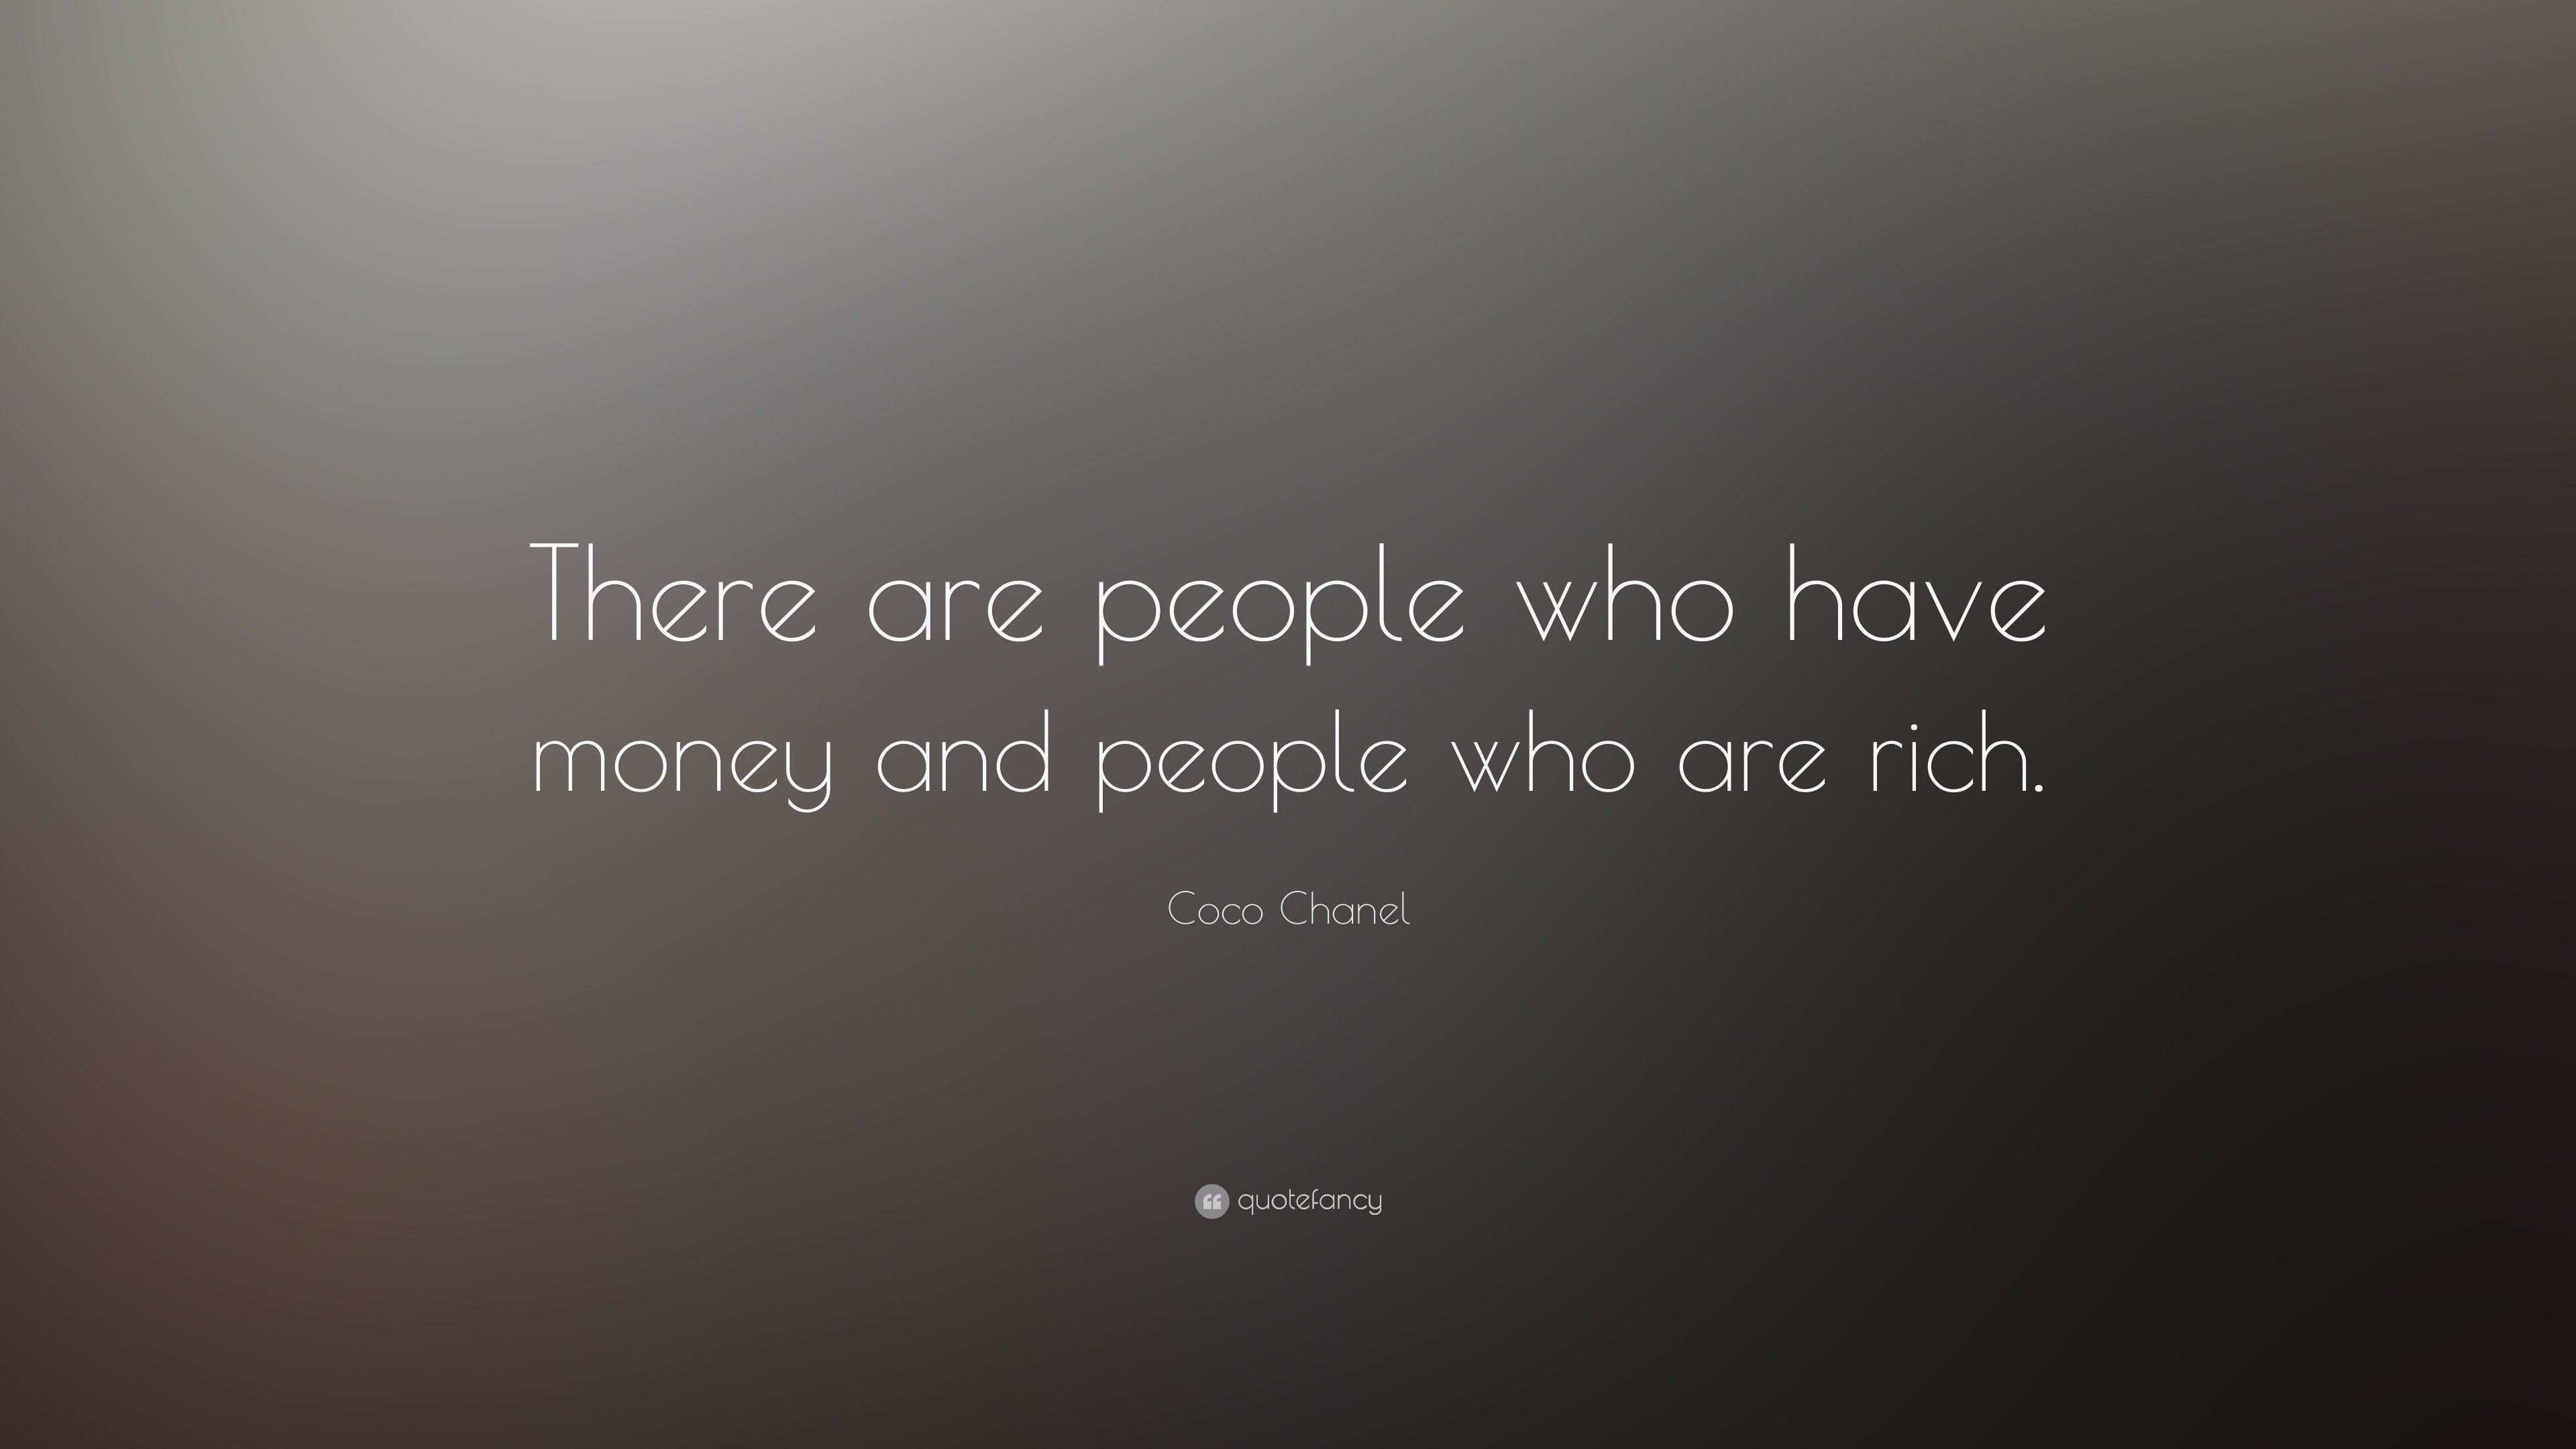 Coco Chanel Quote: “There are people who have money and people who are  rich.”